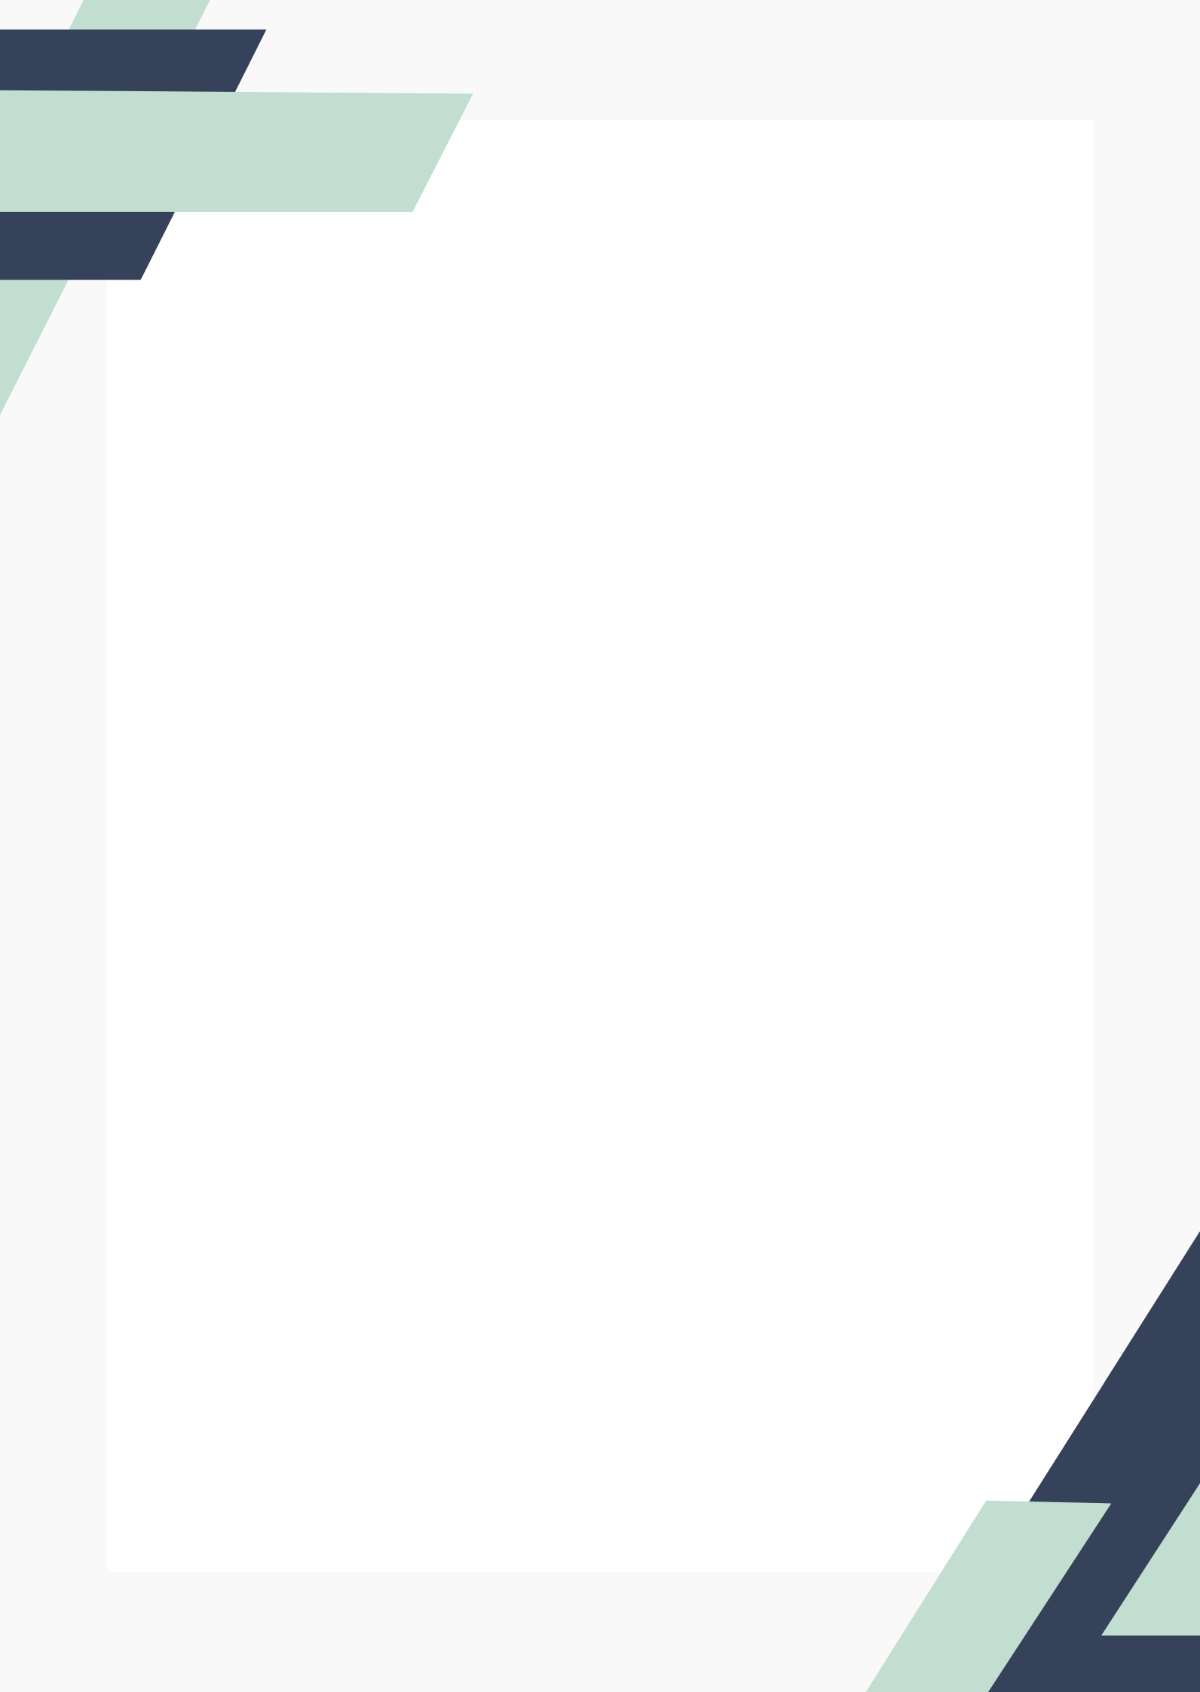 Free Formal Page Border Template